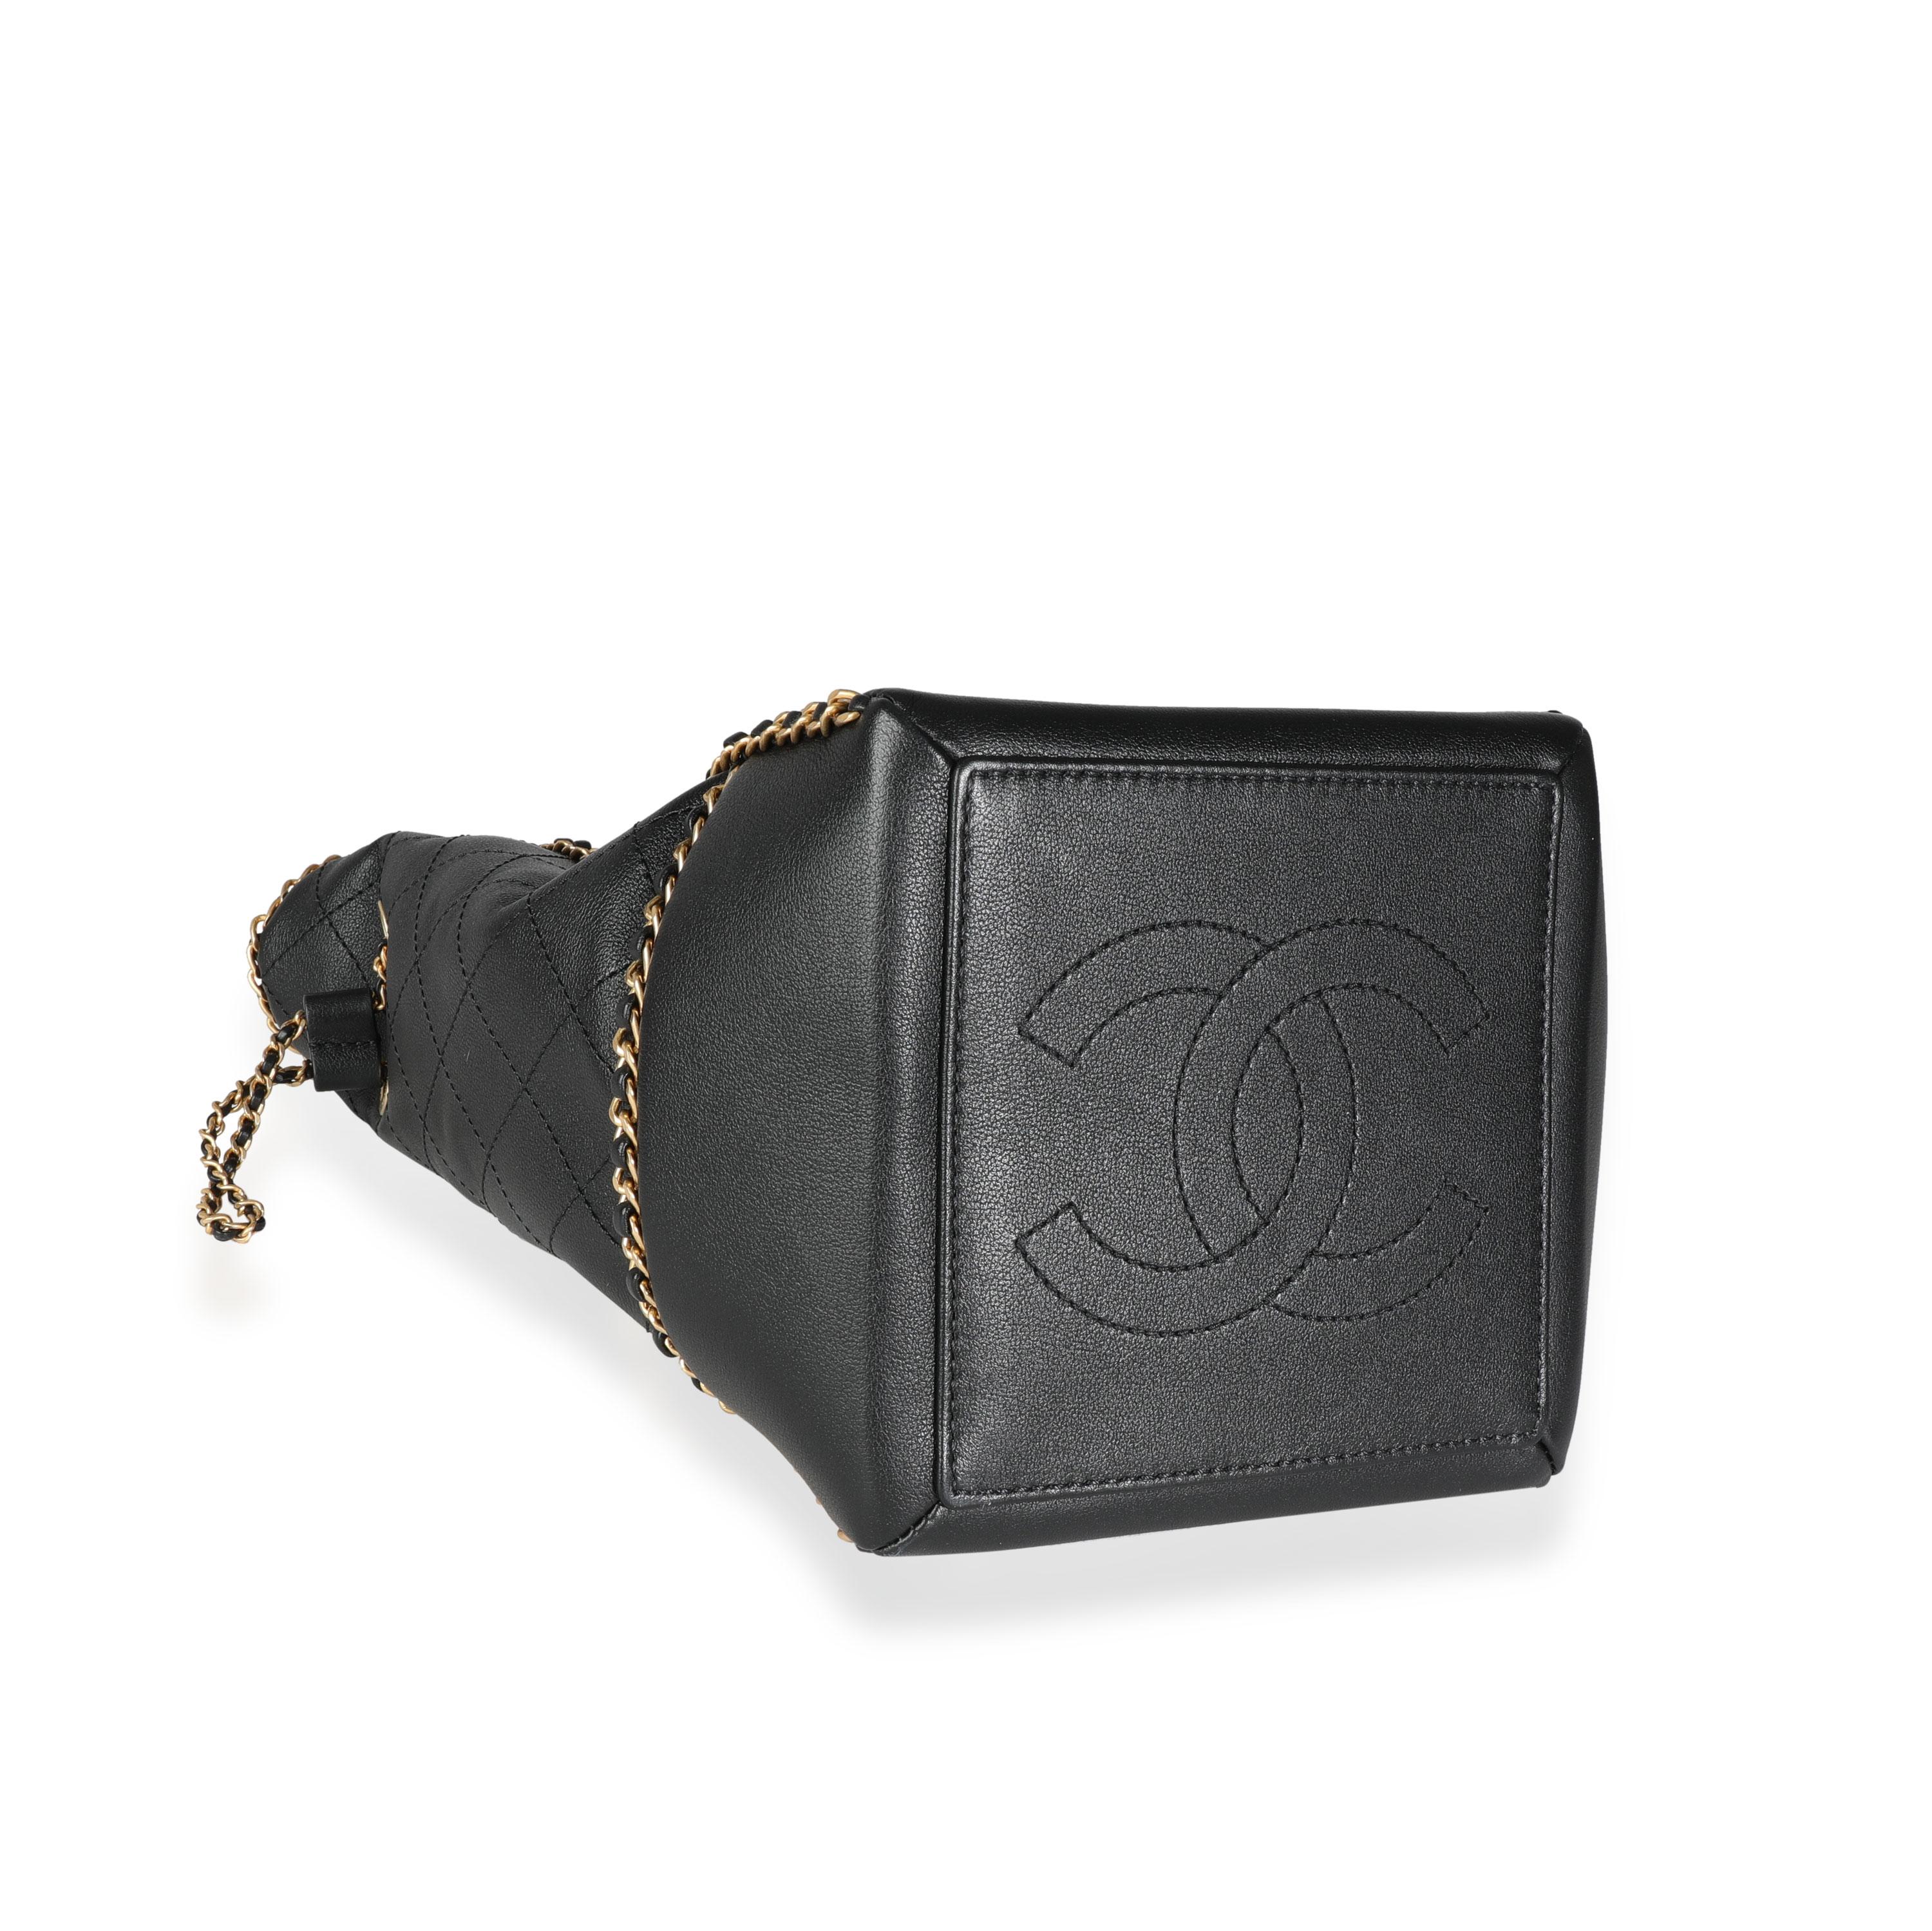 Chanel Black Quilted Calfskin Chain Drawstring Bag 1